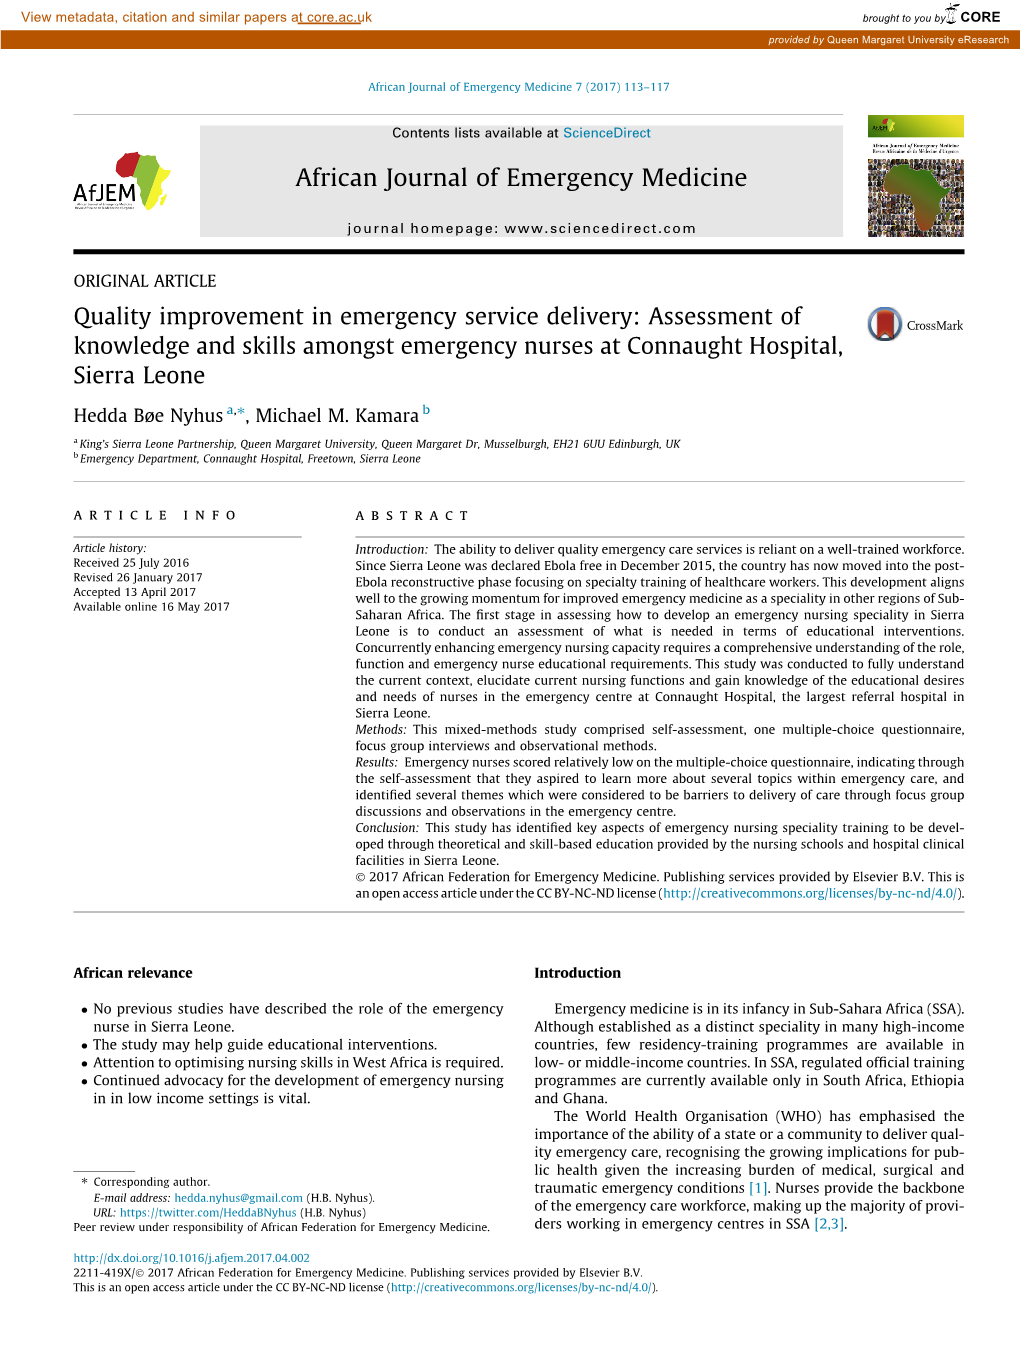 Quality Improvement in Emergency Service Delivery